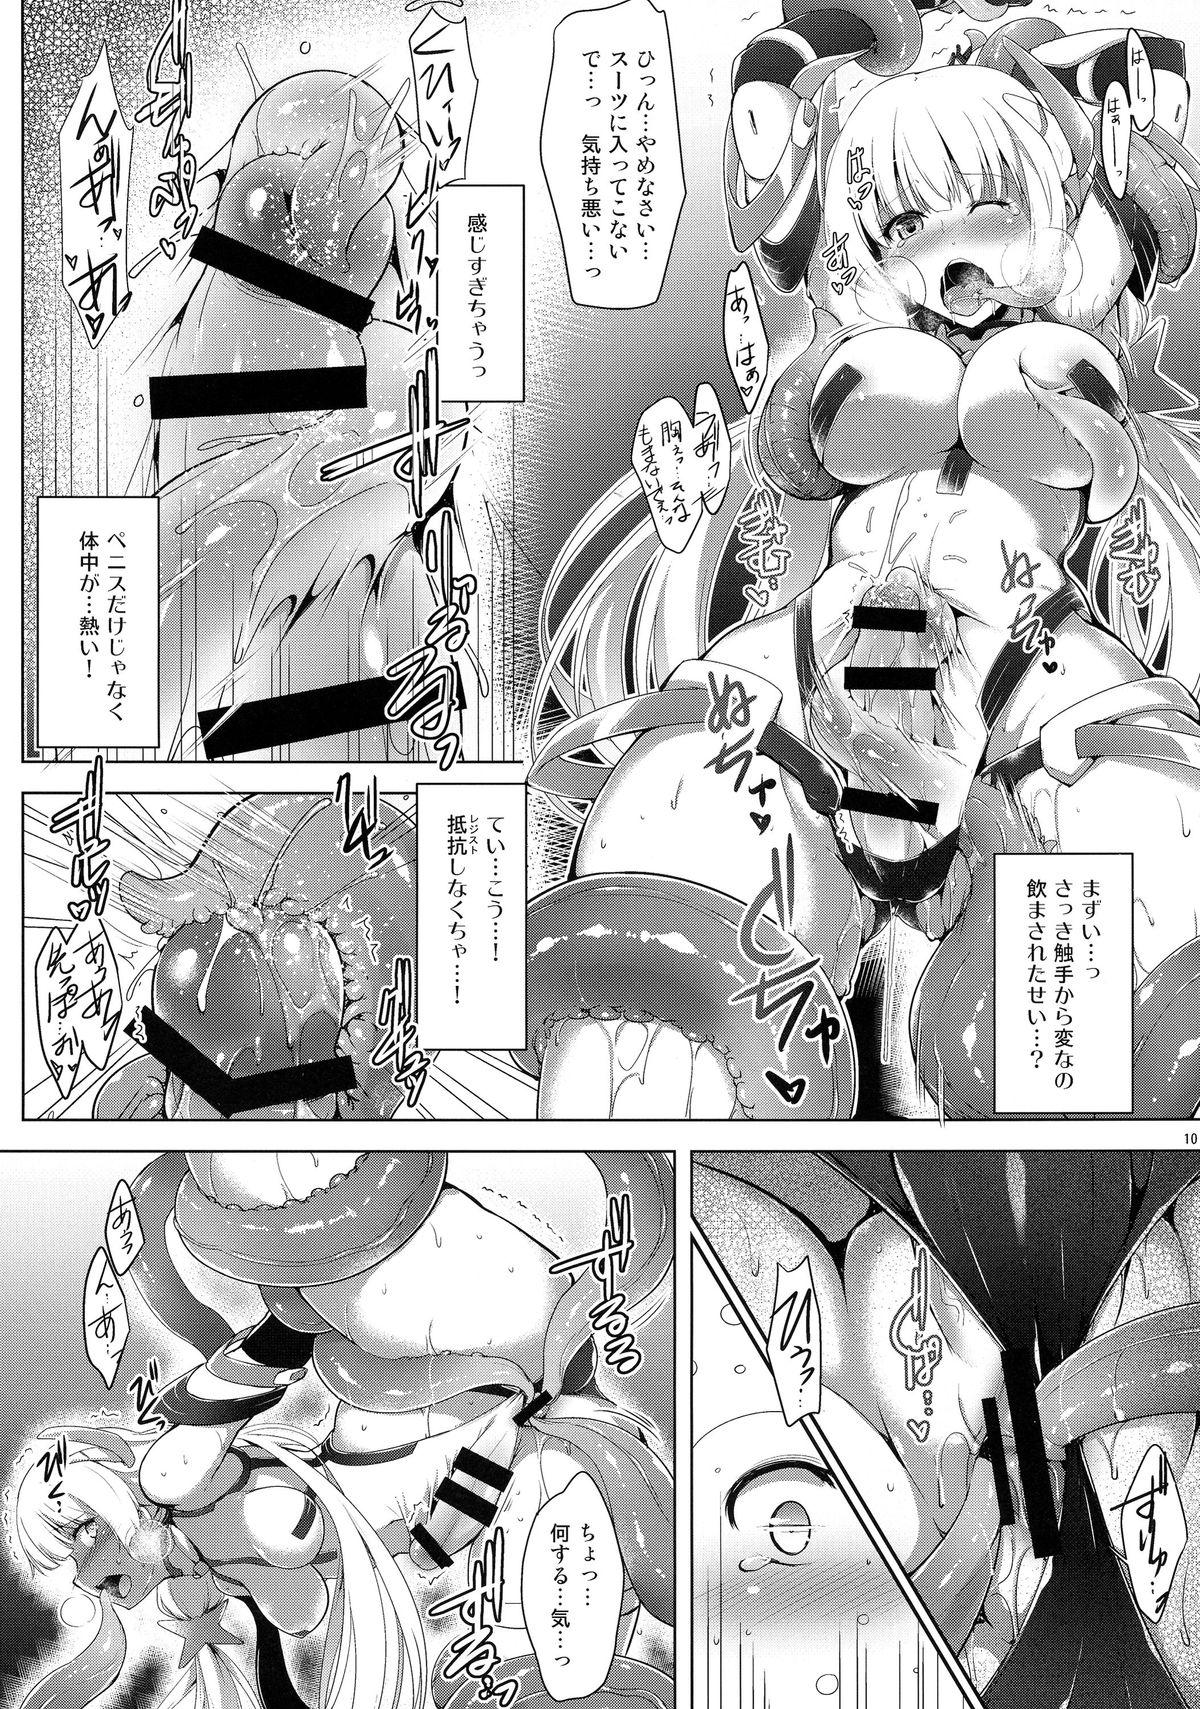 Latinas K.231 - Expelled from paradise Blowjob - Page 10